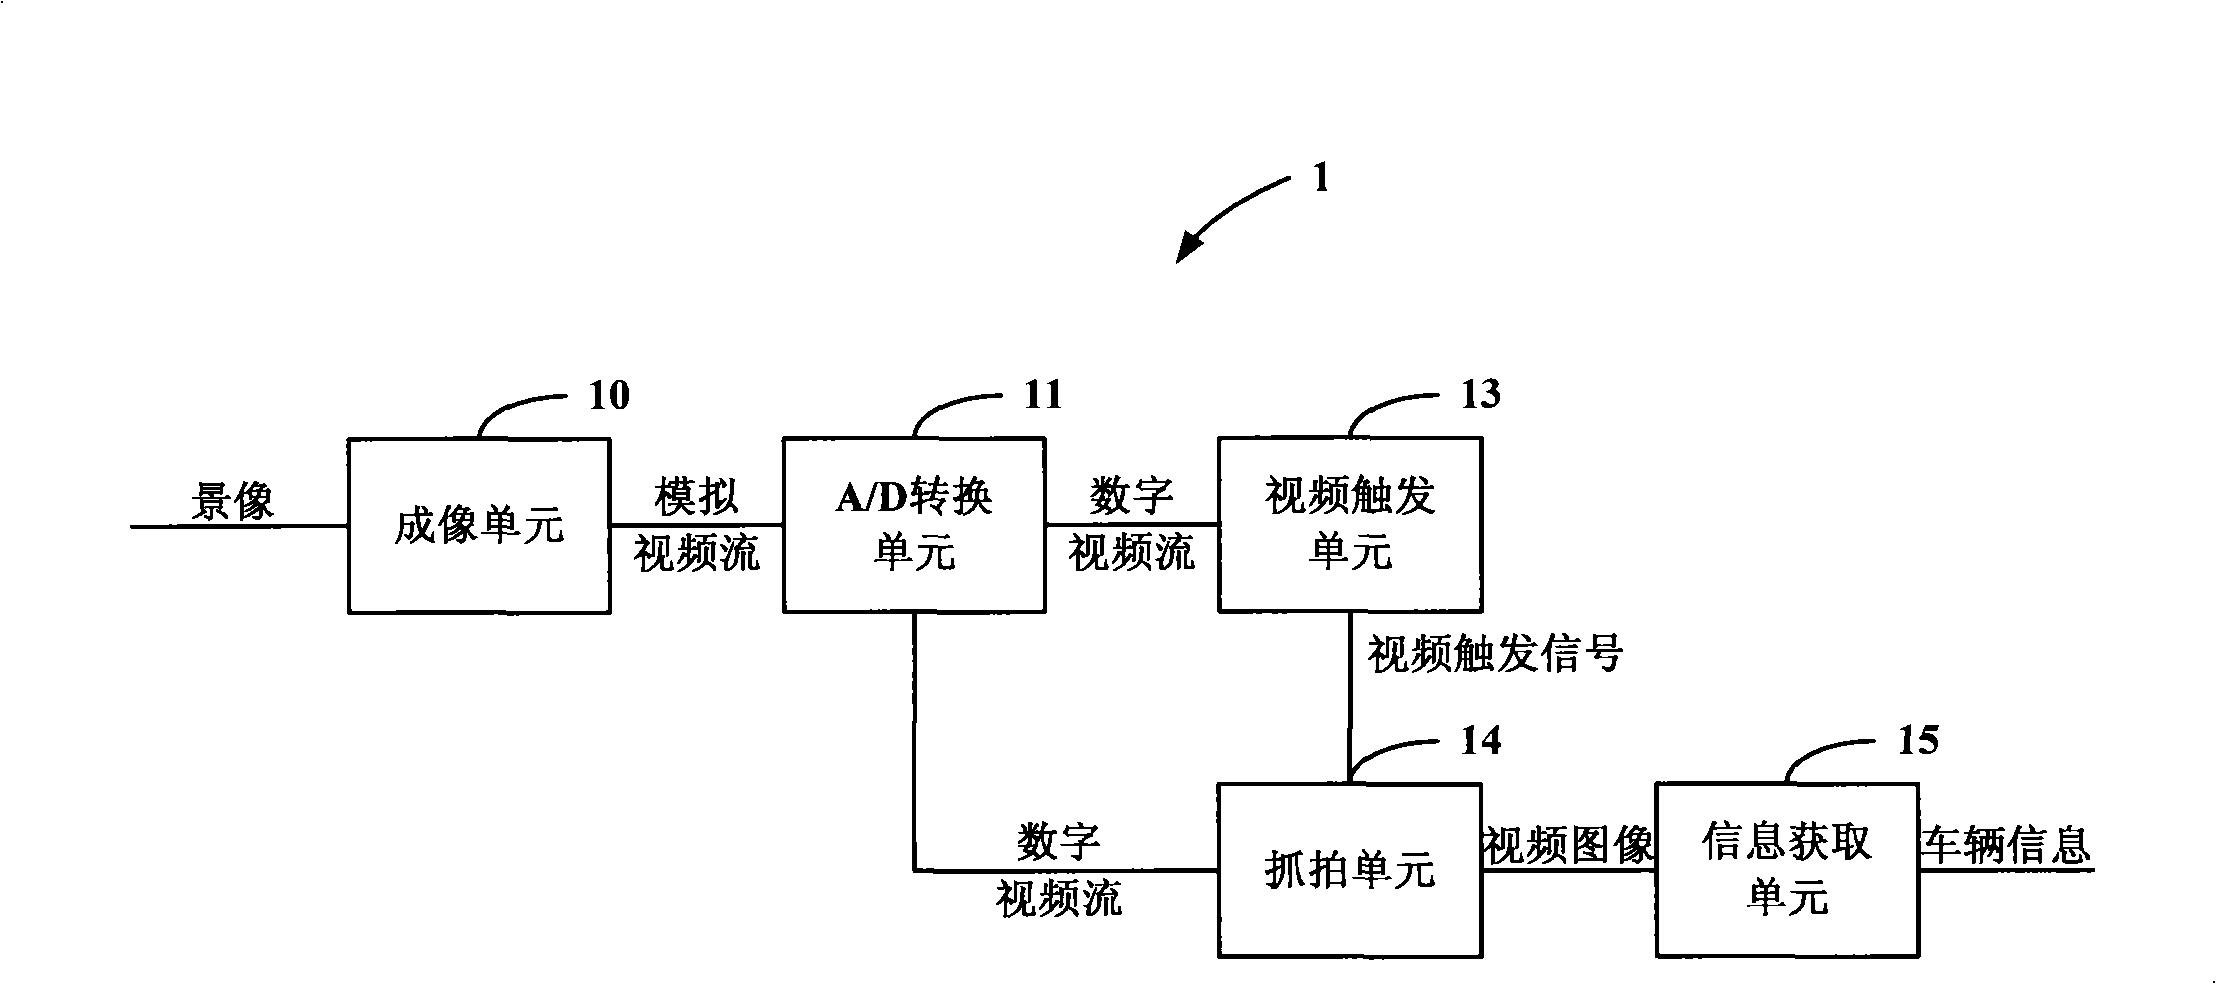 Image acquisition and processing equipment and method, vehicle monitoring and recording system